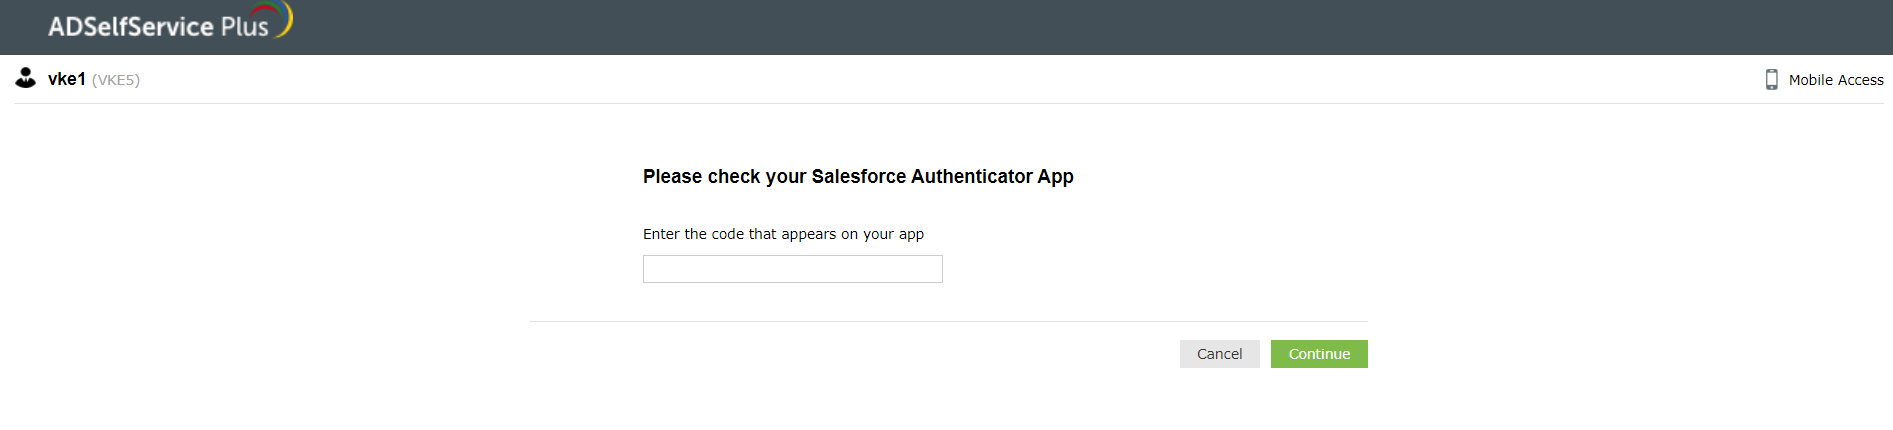 Configuring Salesforce Authenticator for identity verification